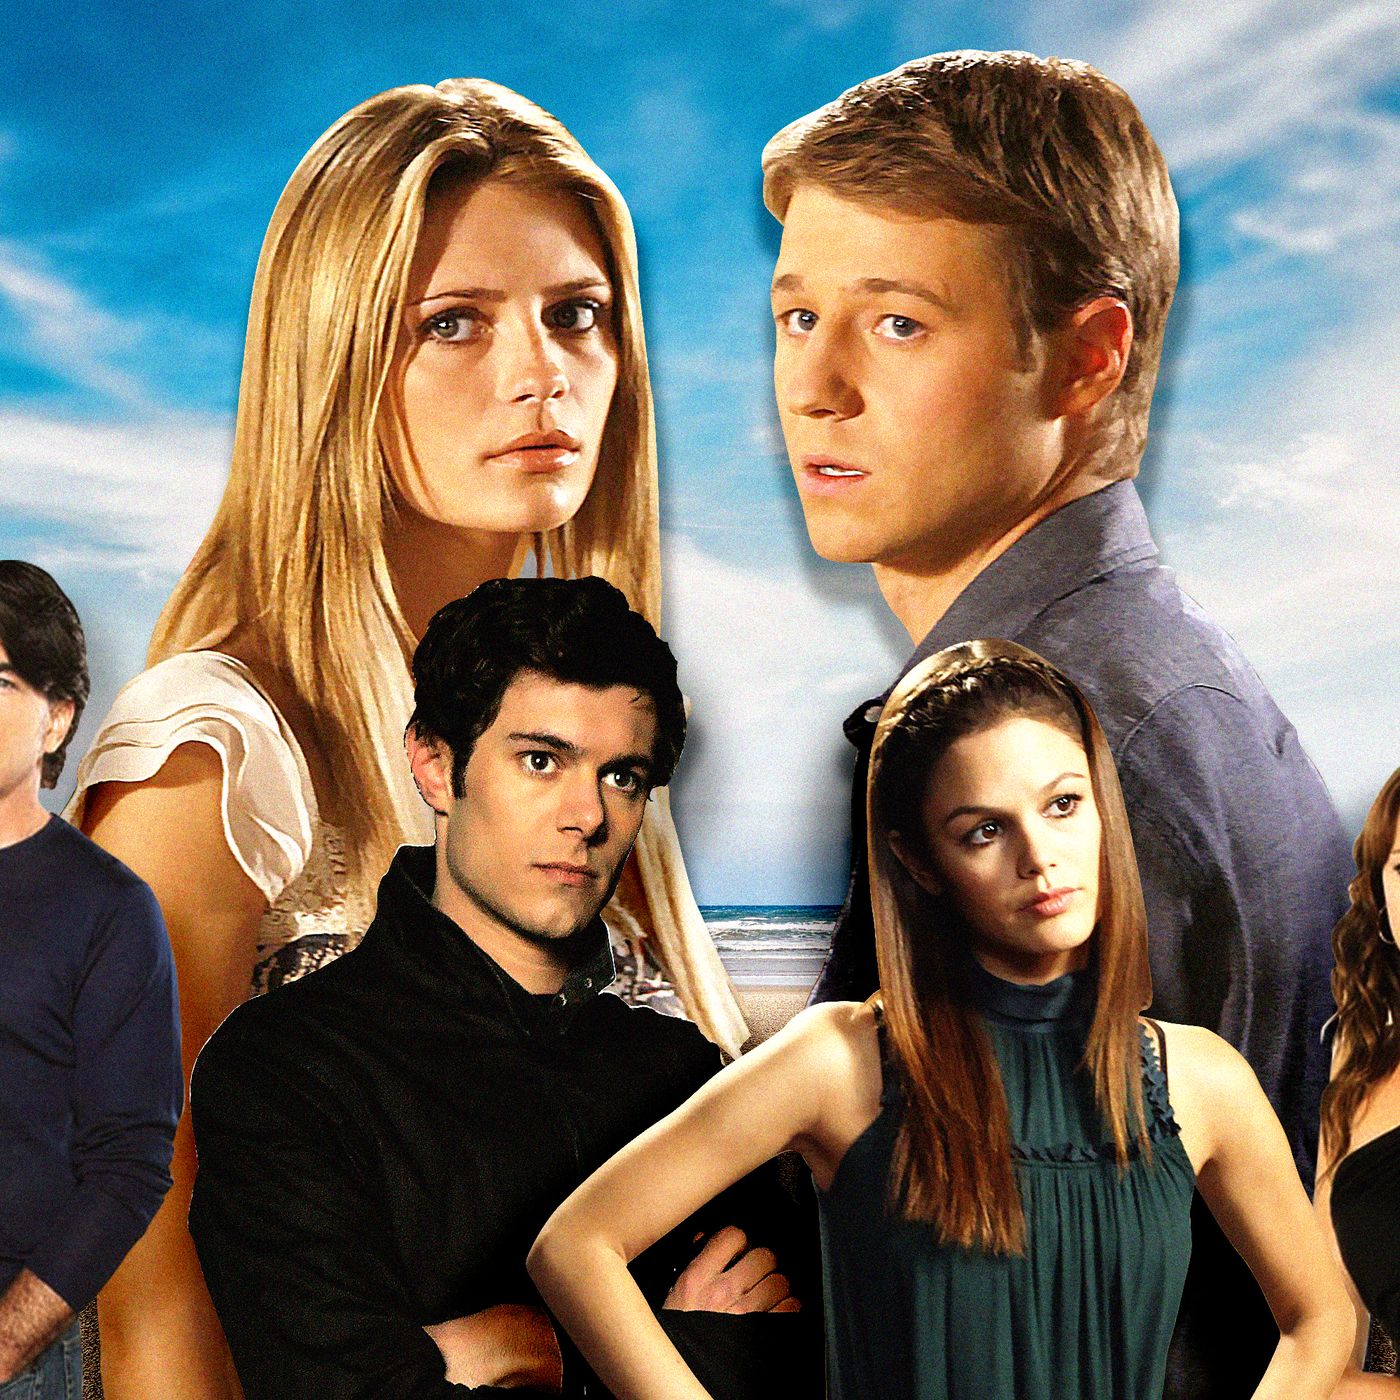 Fkk Mature Swingers - The Best Episodes of 'The O.C.' Ranked From Start to Finish